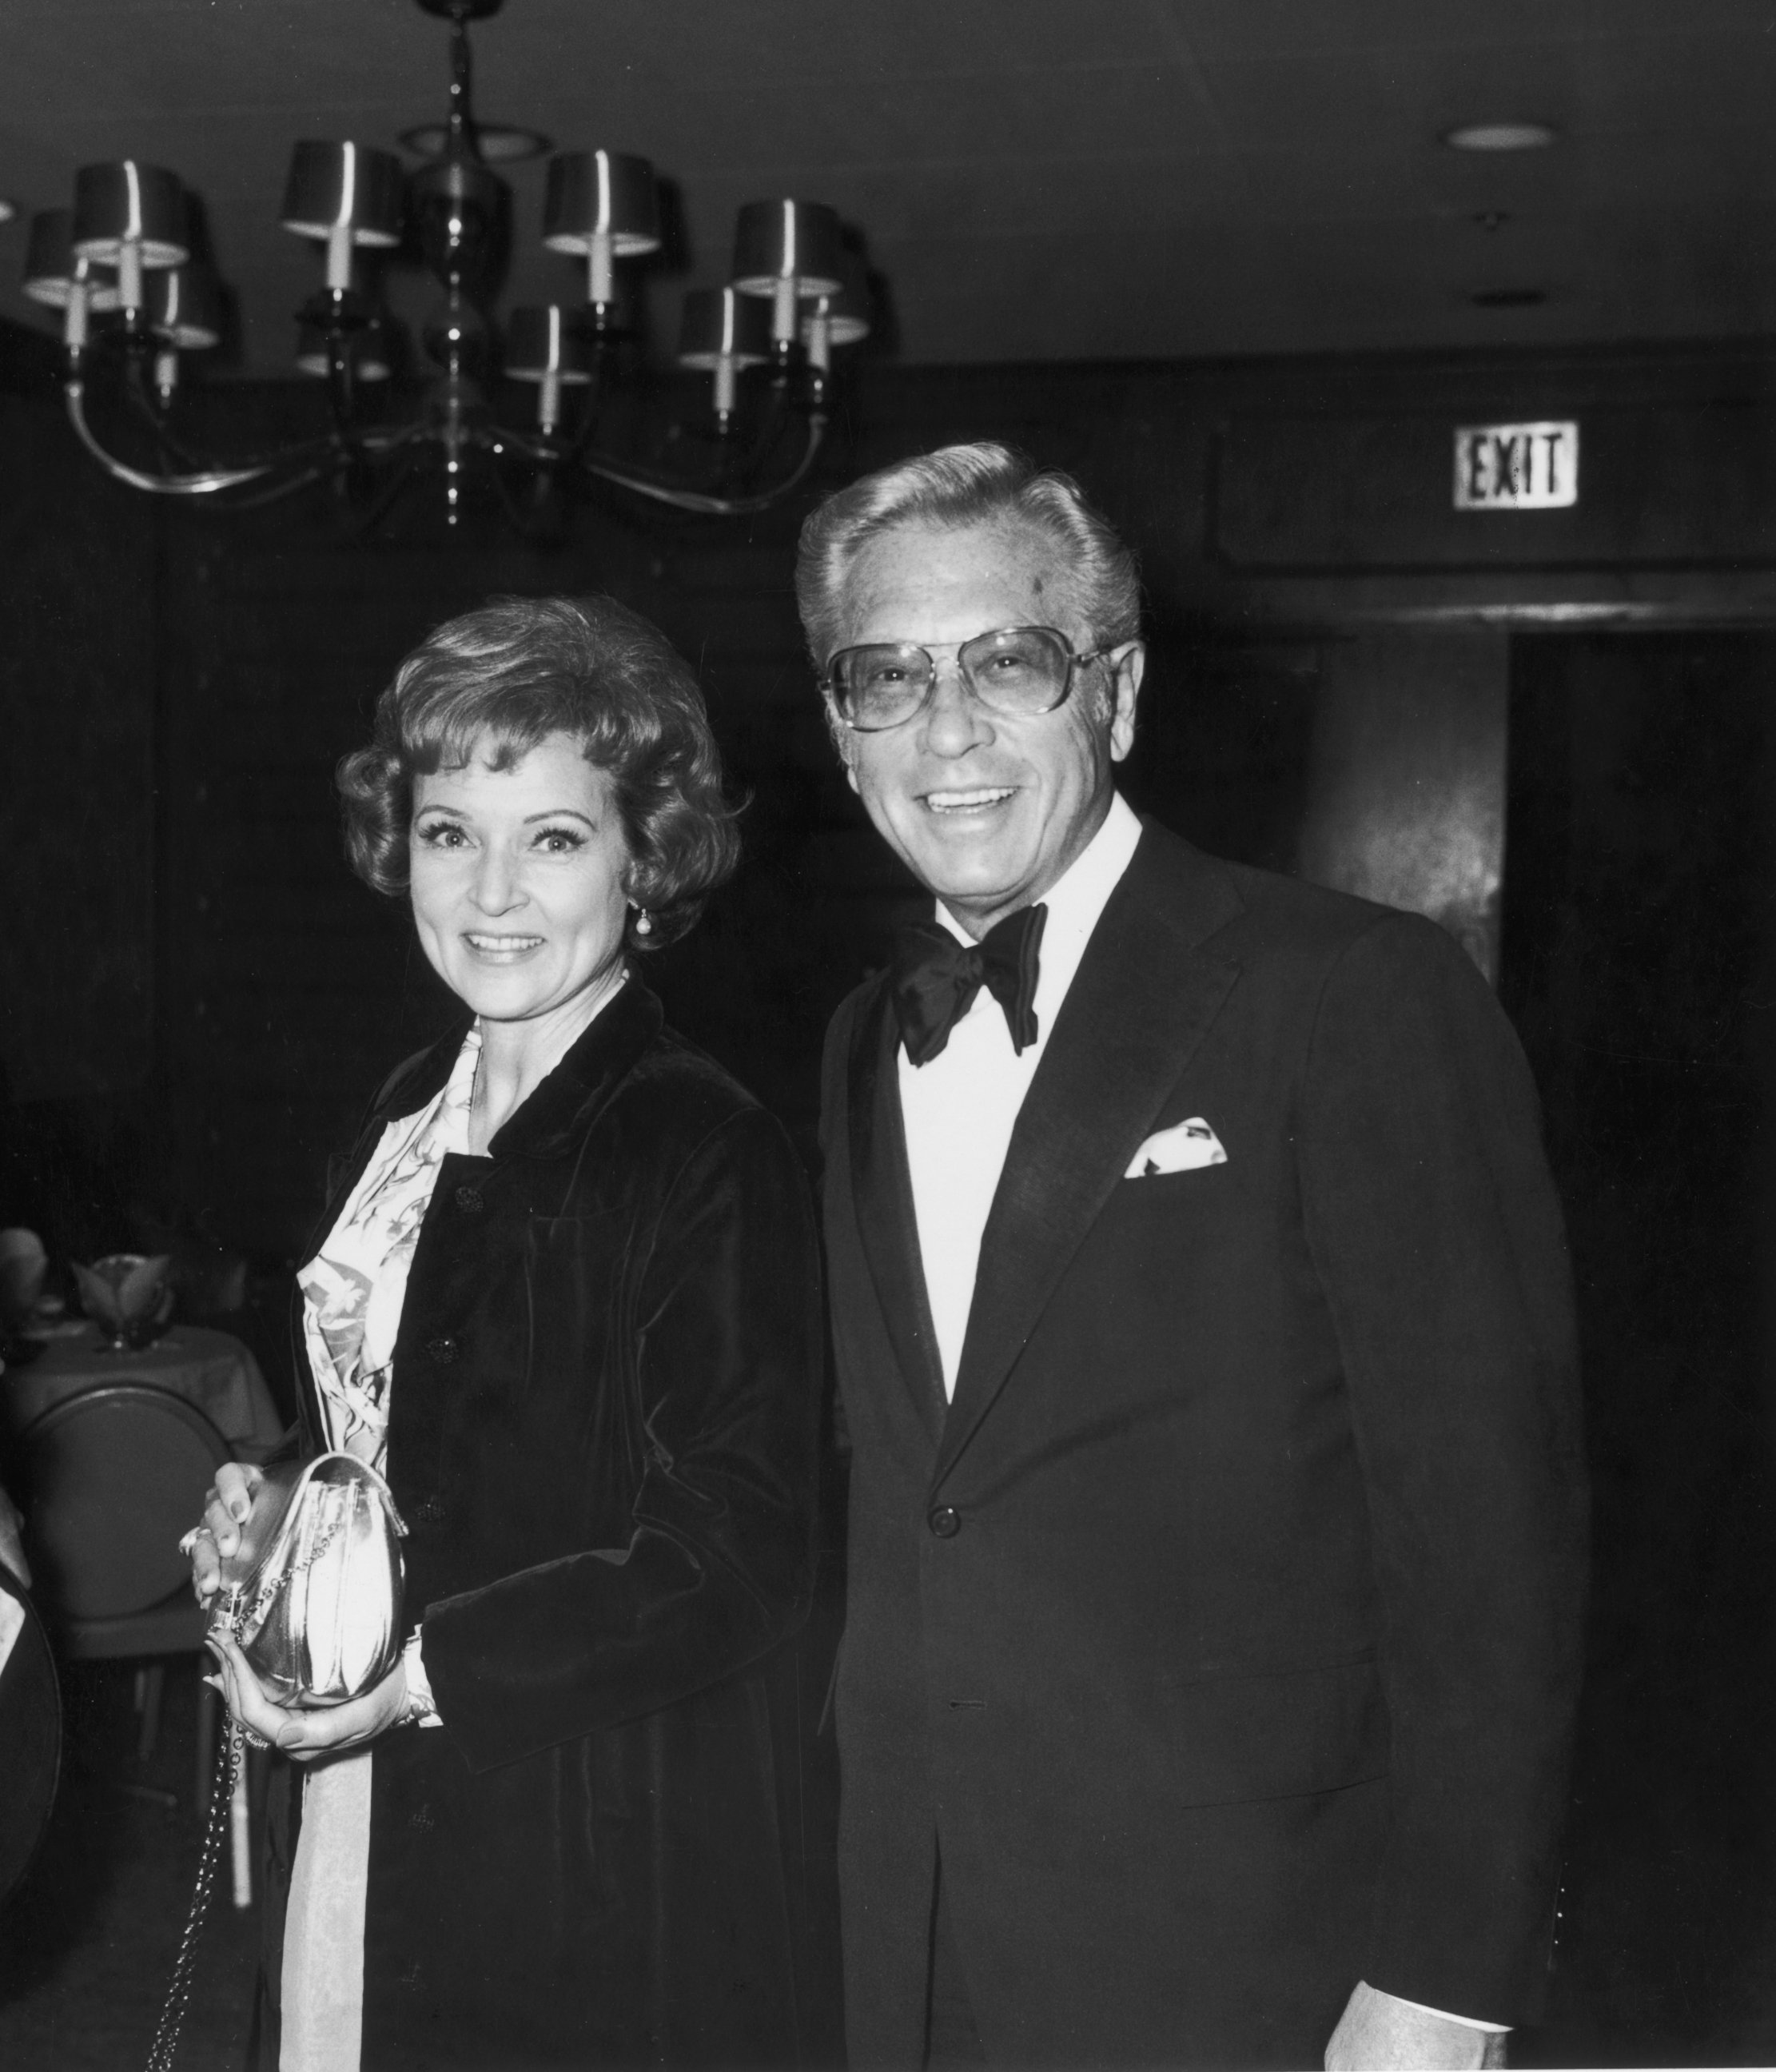 Betty White photographed smiling with her husband, TV producer Allen Ludden during an International Broadcasting Awards dinner tribute to Mary Tyler Moore on March 19, 1974 ┃ Source: Getty Images